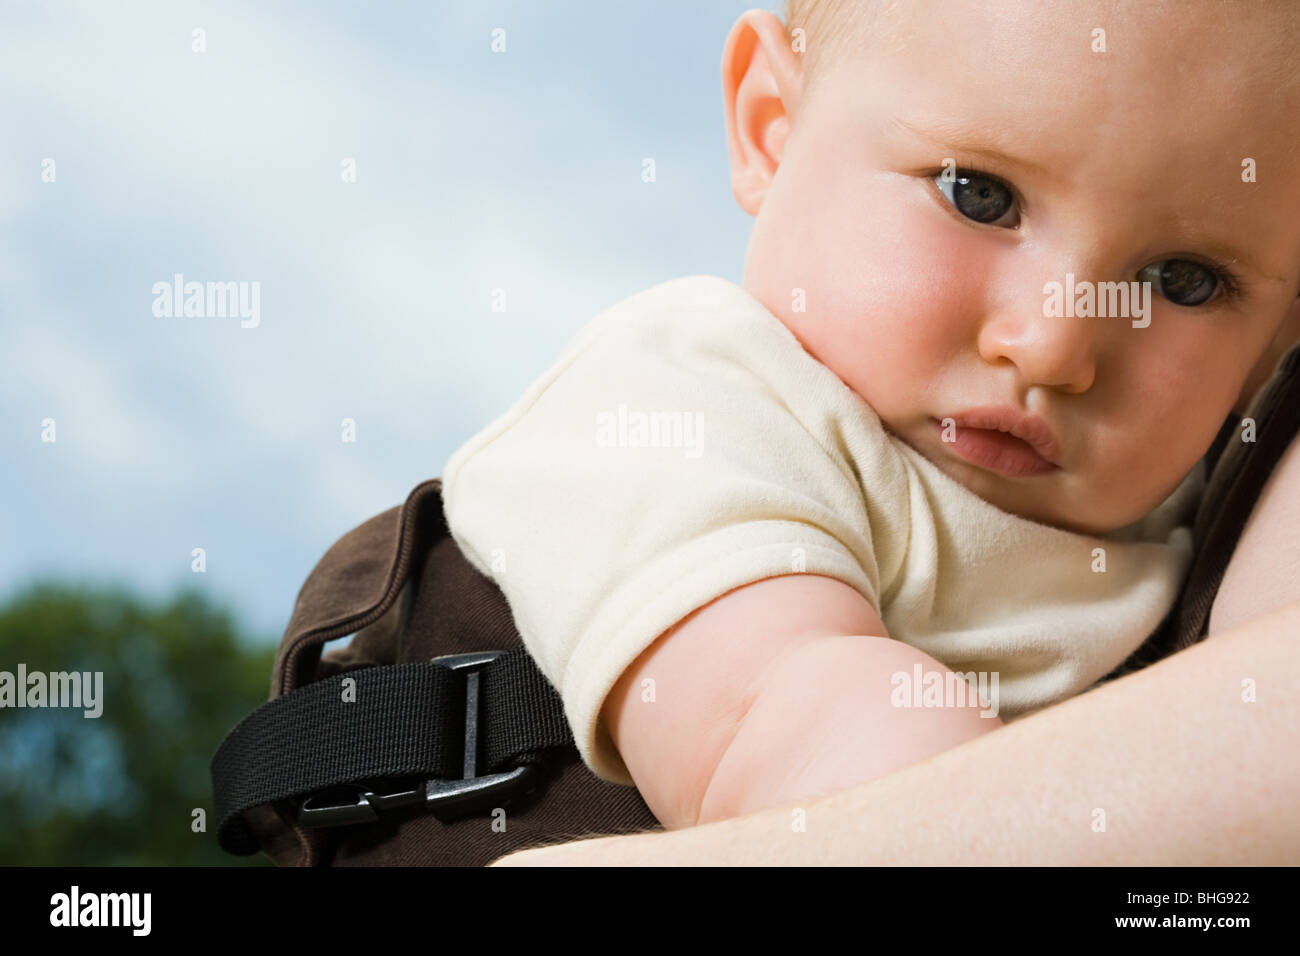 Baby in baby carrier Stock Photo